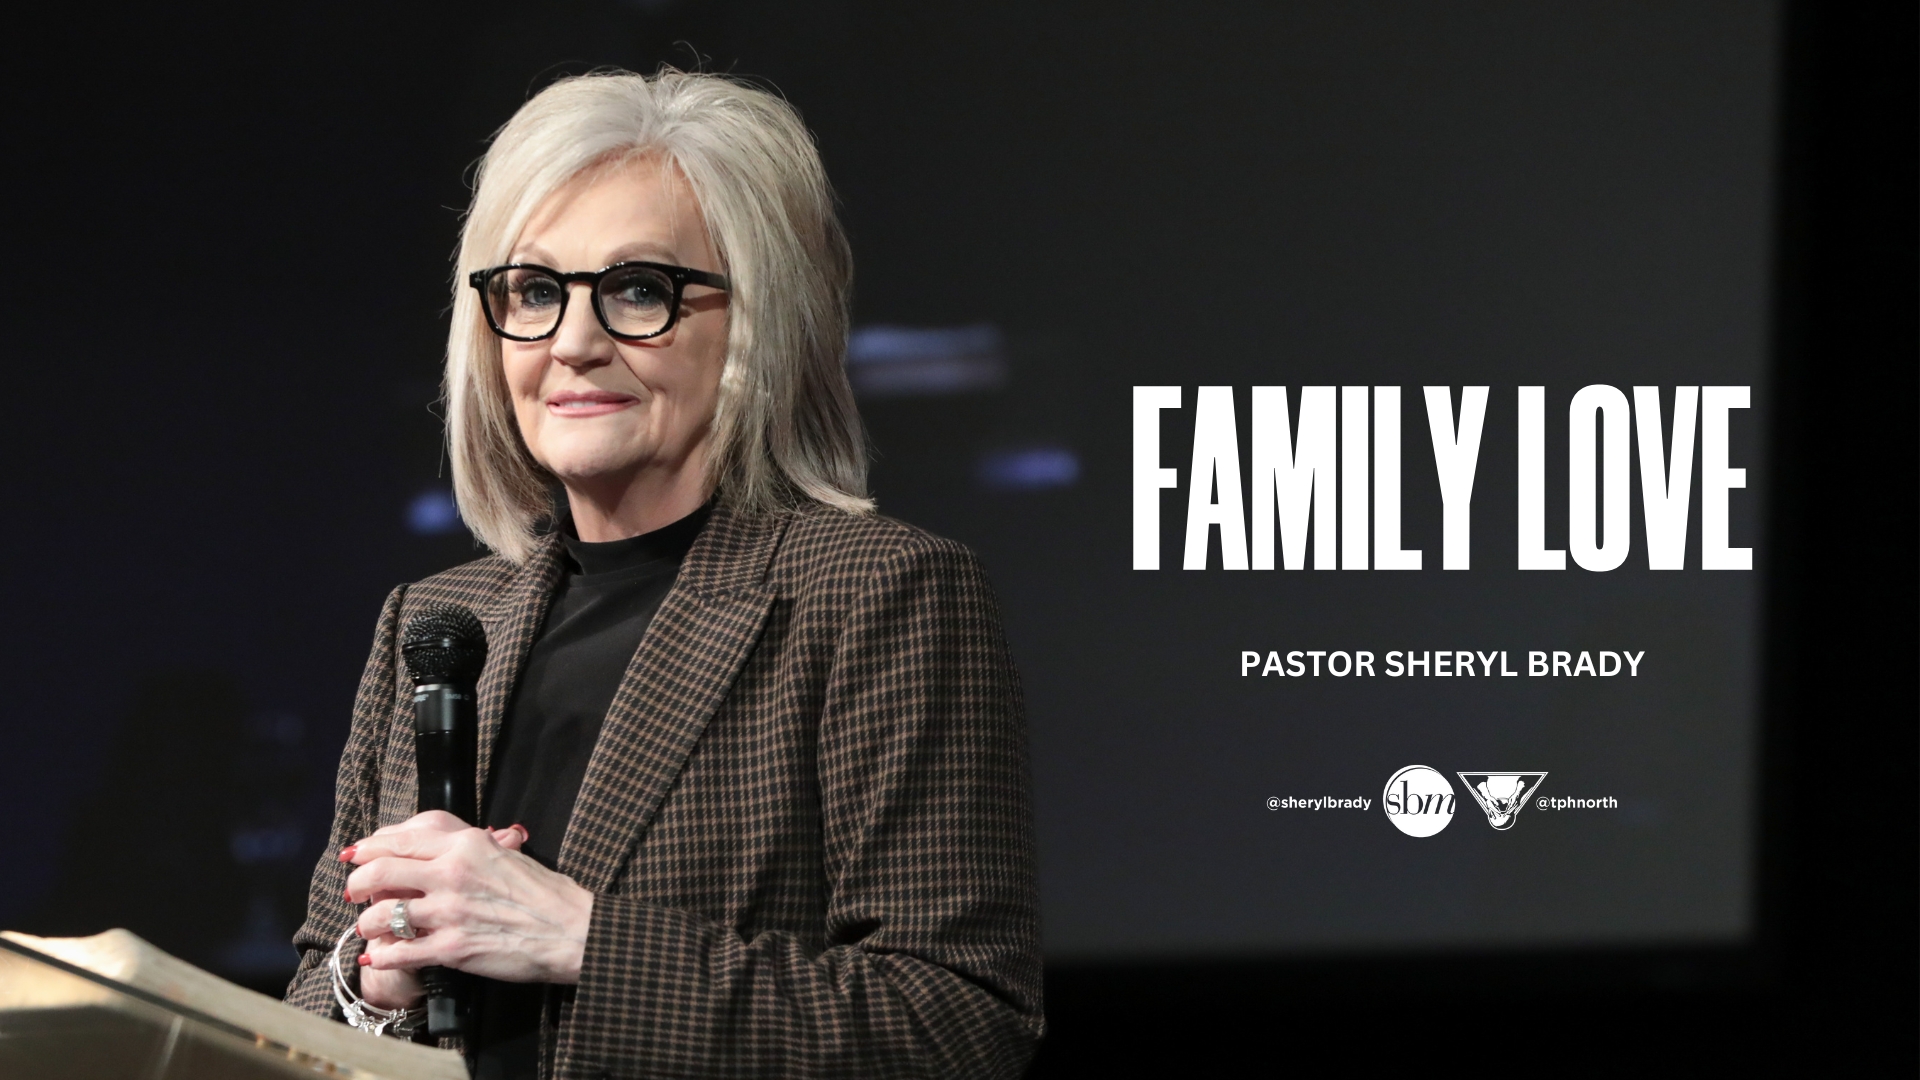 Latest sermon speaker featured image, typically Pastor Sheryl Brady or an associate Pastor of The Potter's House of North Dallas in Frisco, Texas